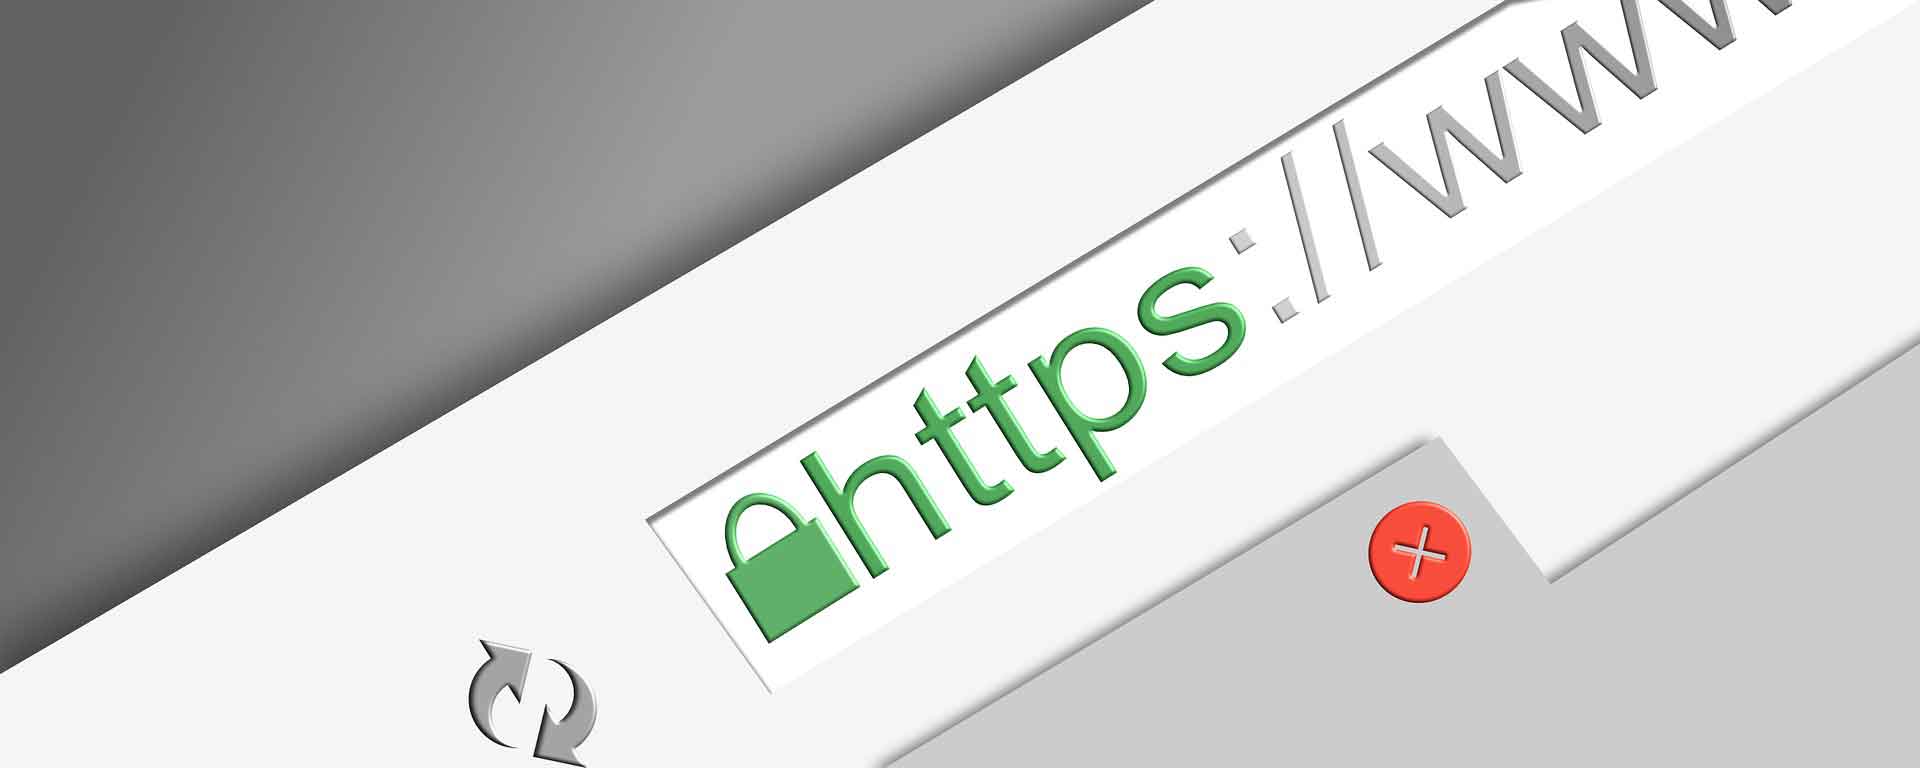 HTTPS-enabled domains